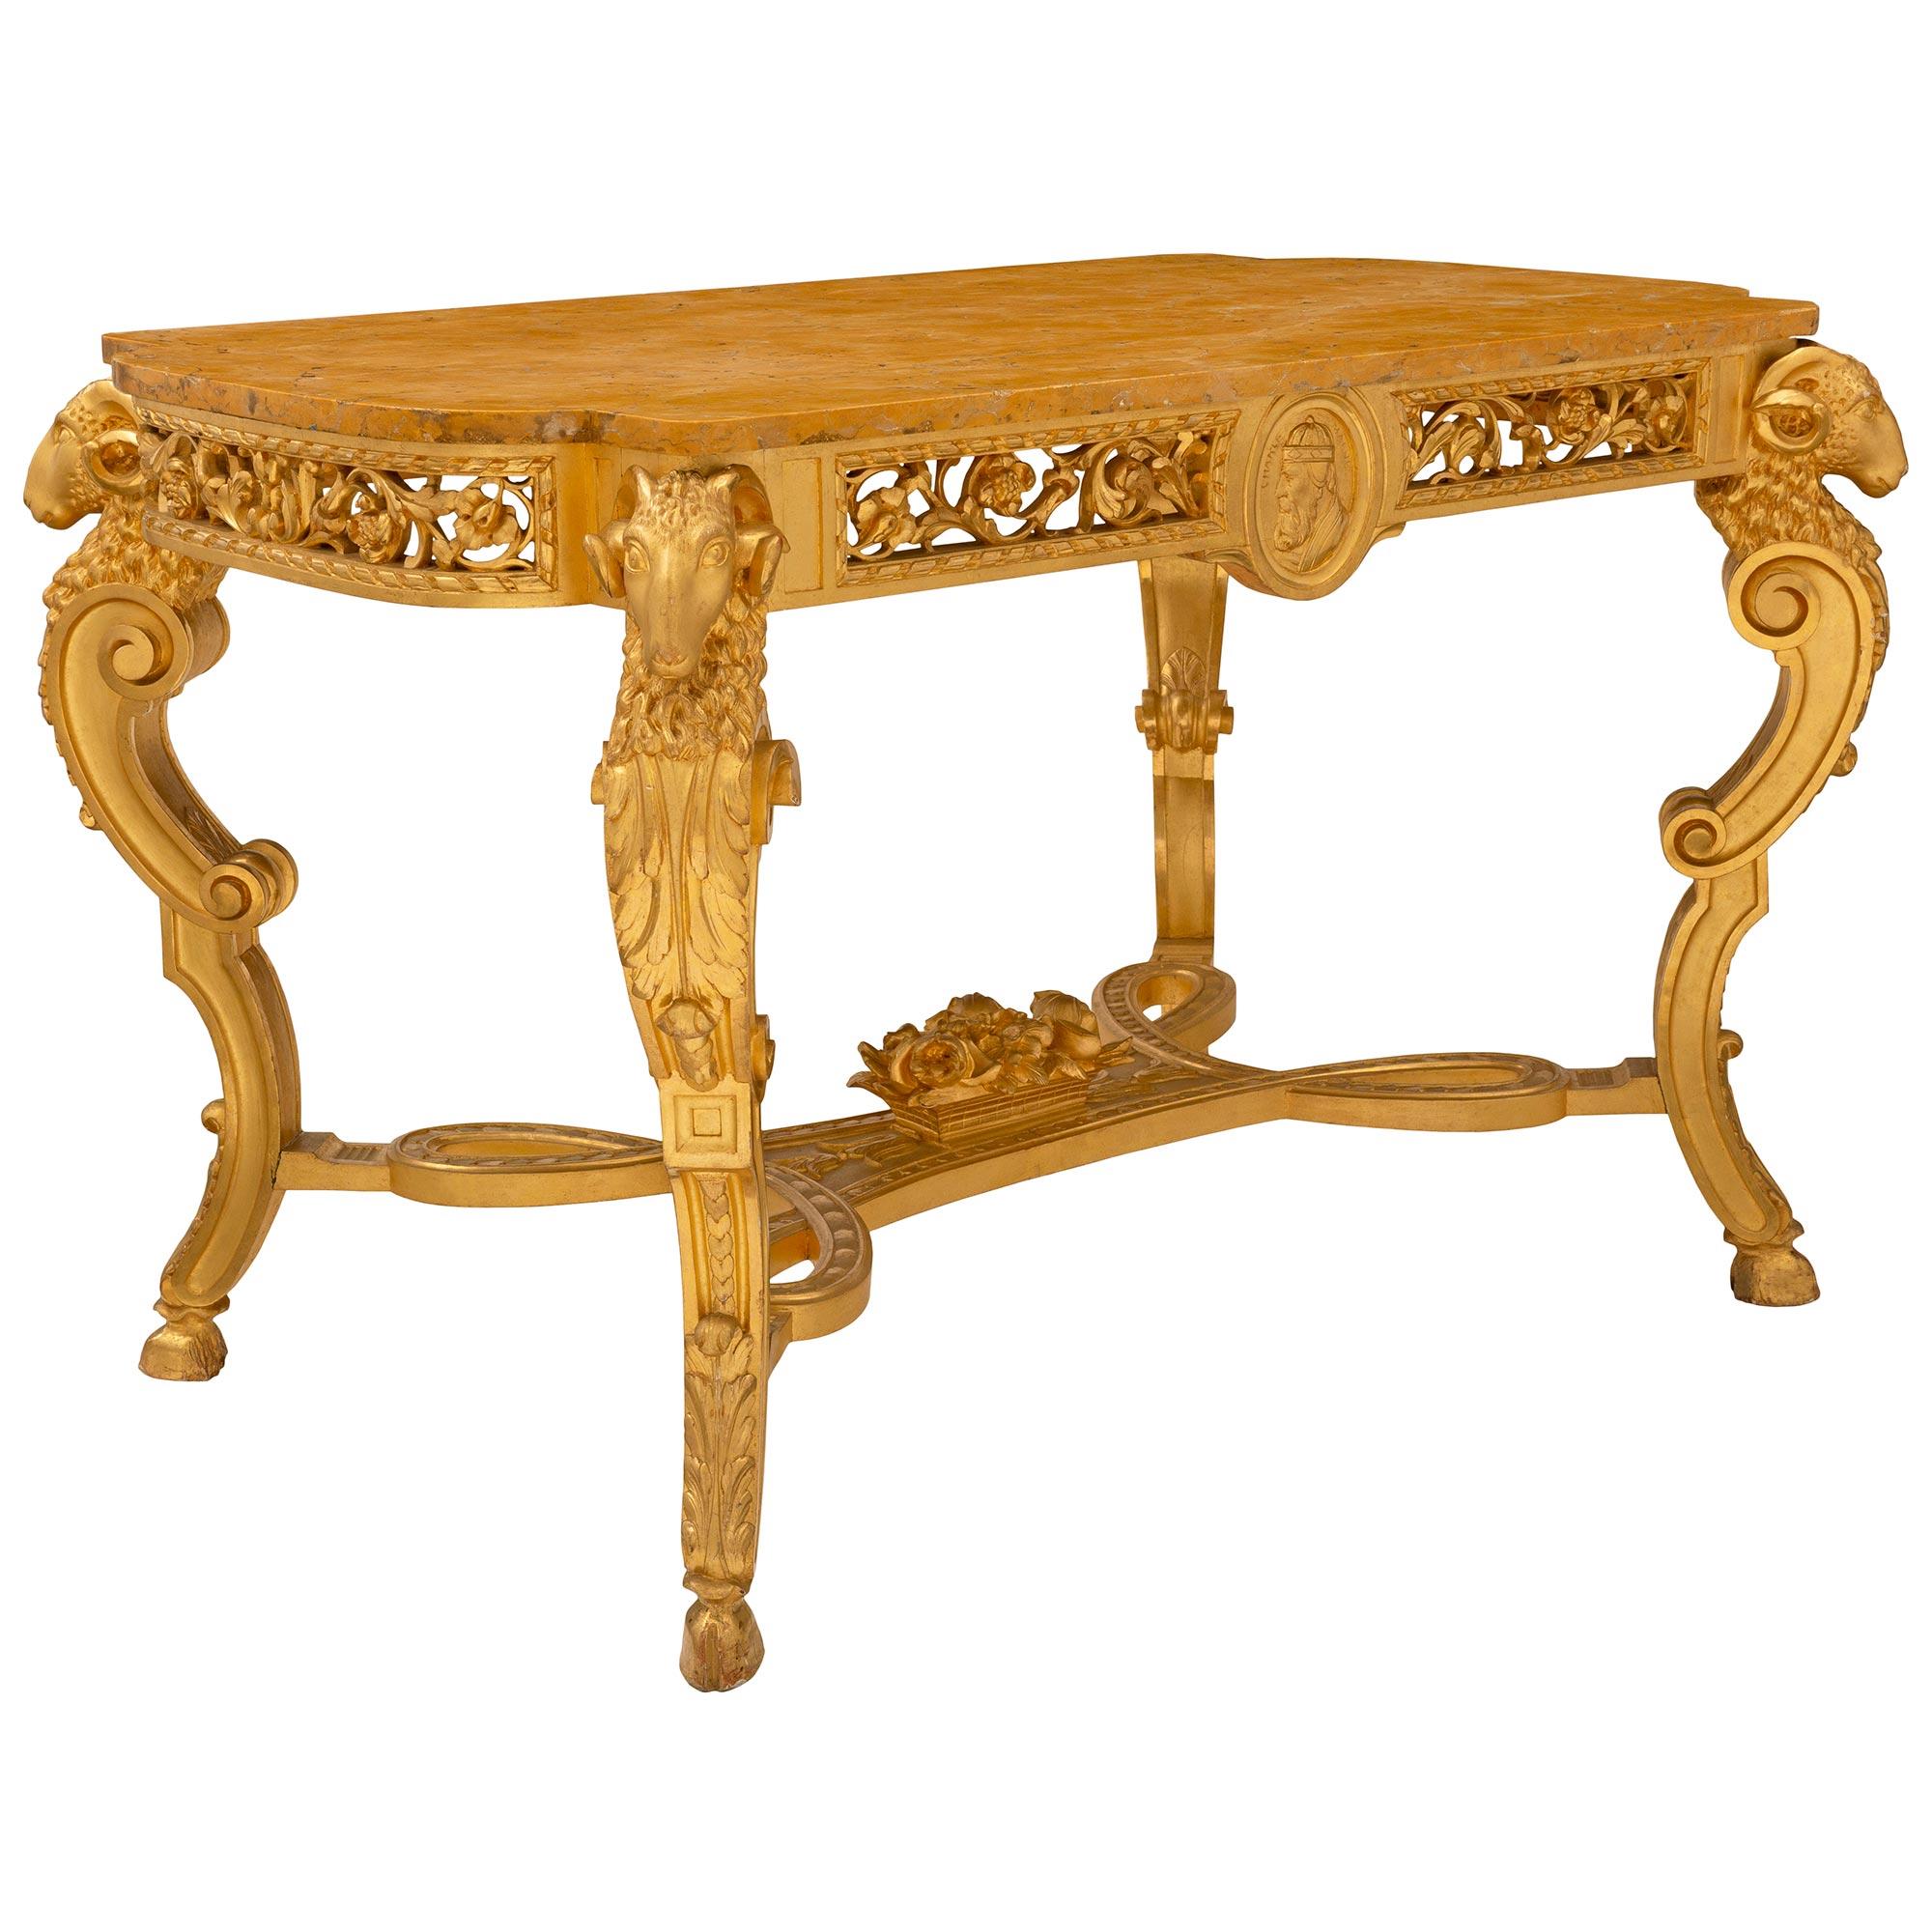 Italian 19th Century Giltwood and Giallo Reale Marble Center Table In Good Condition For Sale In West Palm Beach, FL